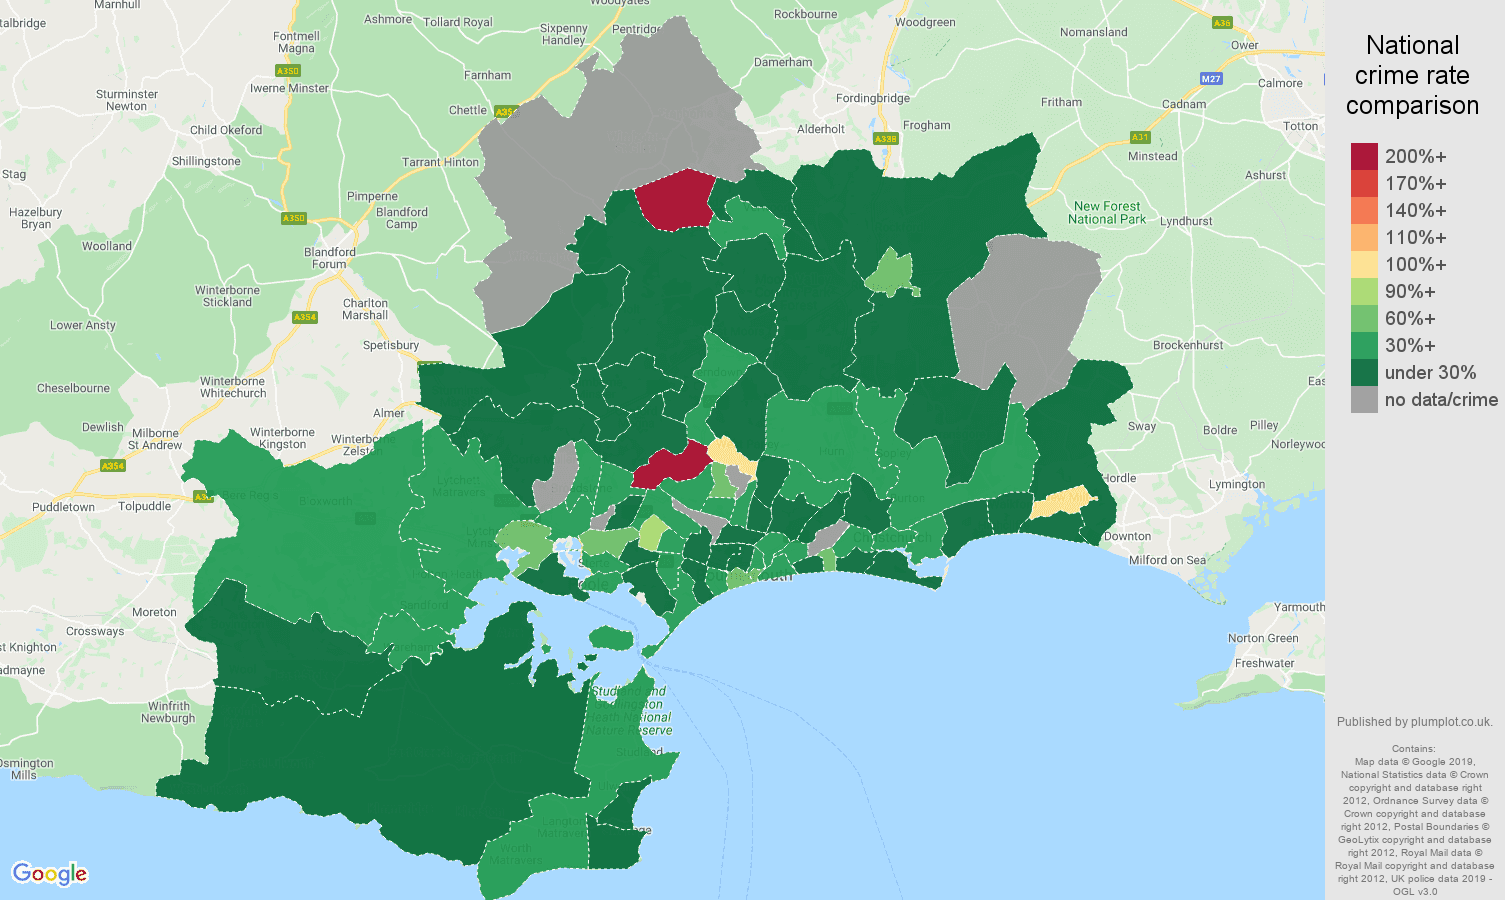 Bournemouth other crime rate comparison map